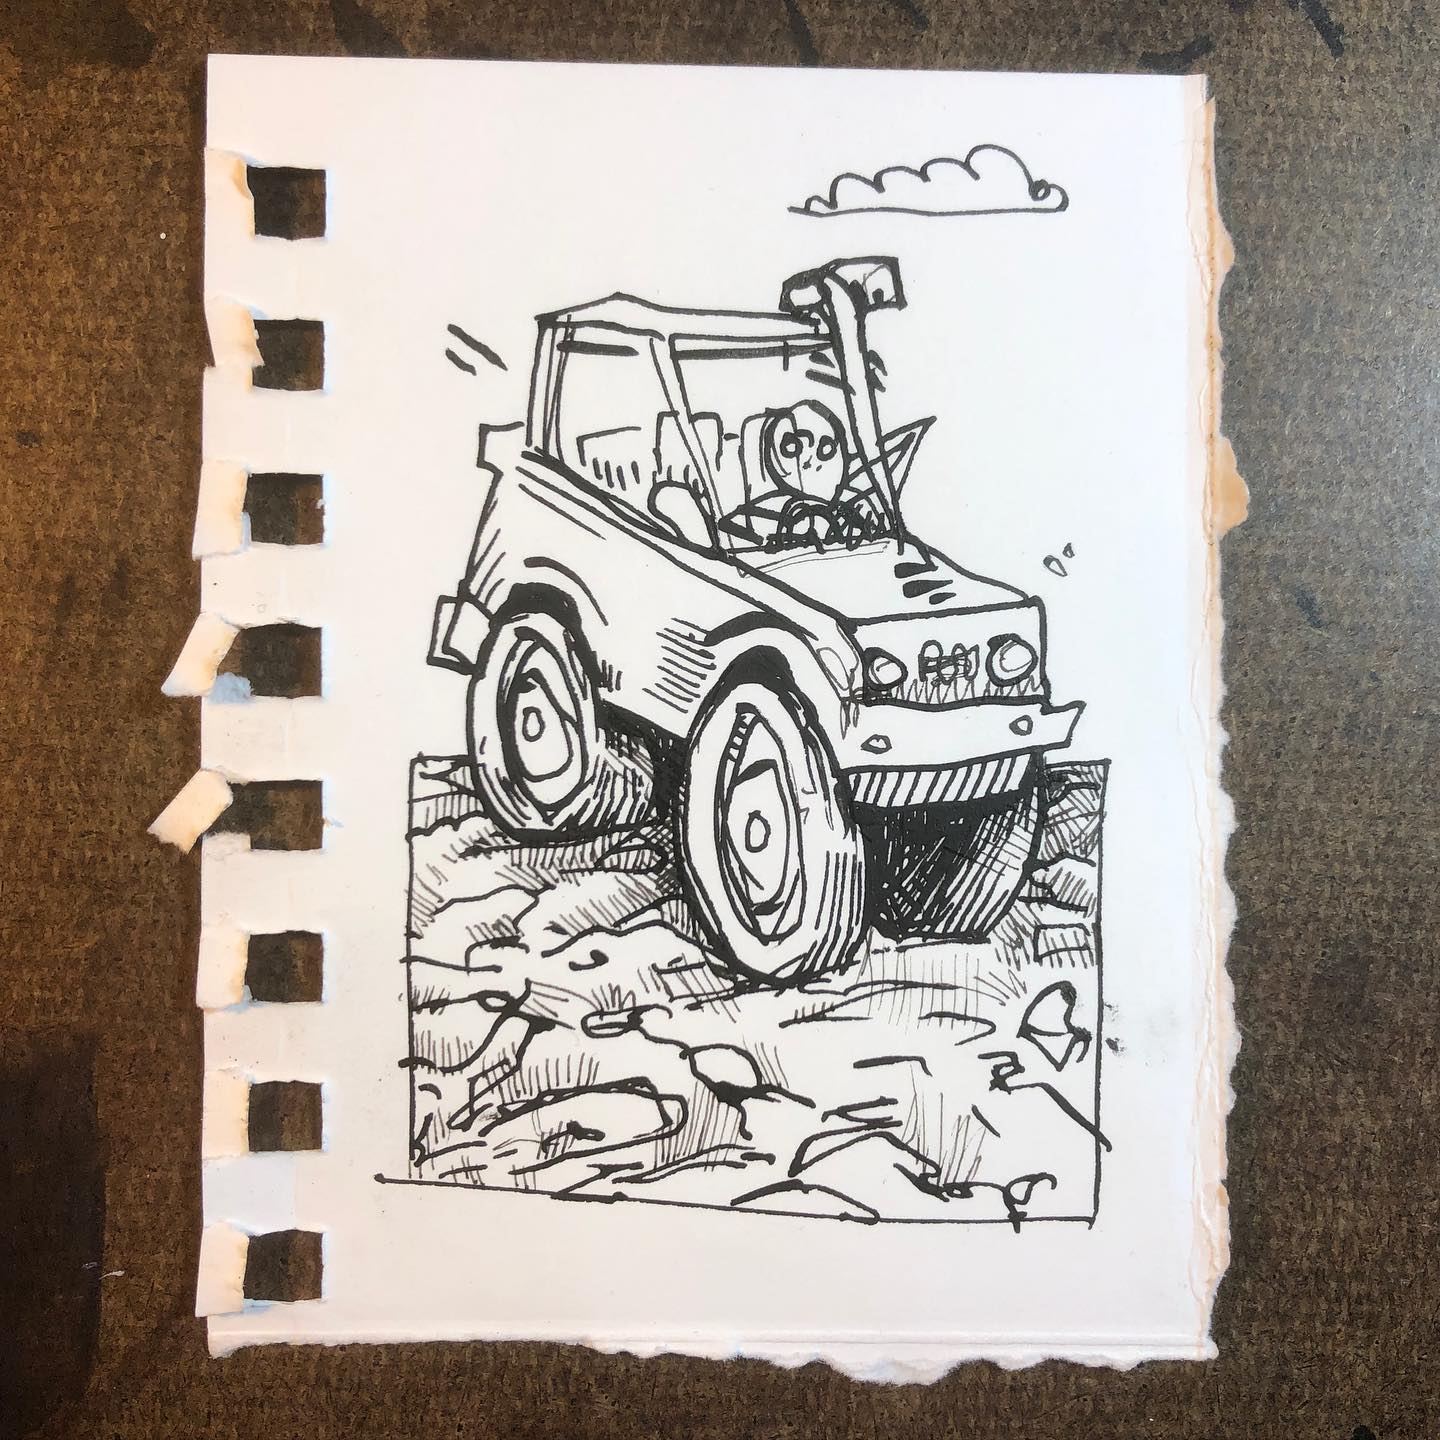 Ink Drawing - "Truck with Snorkel"